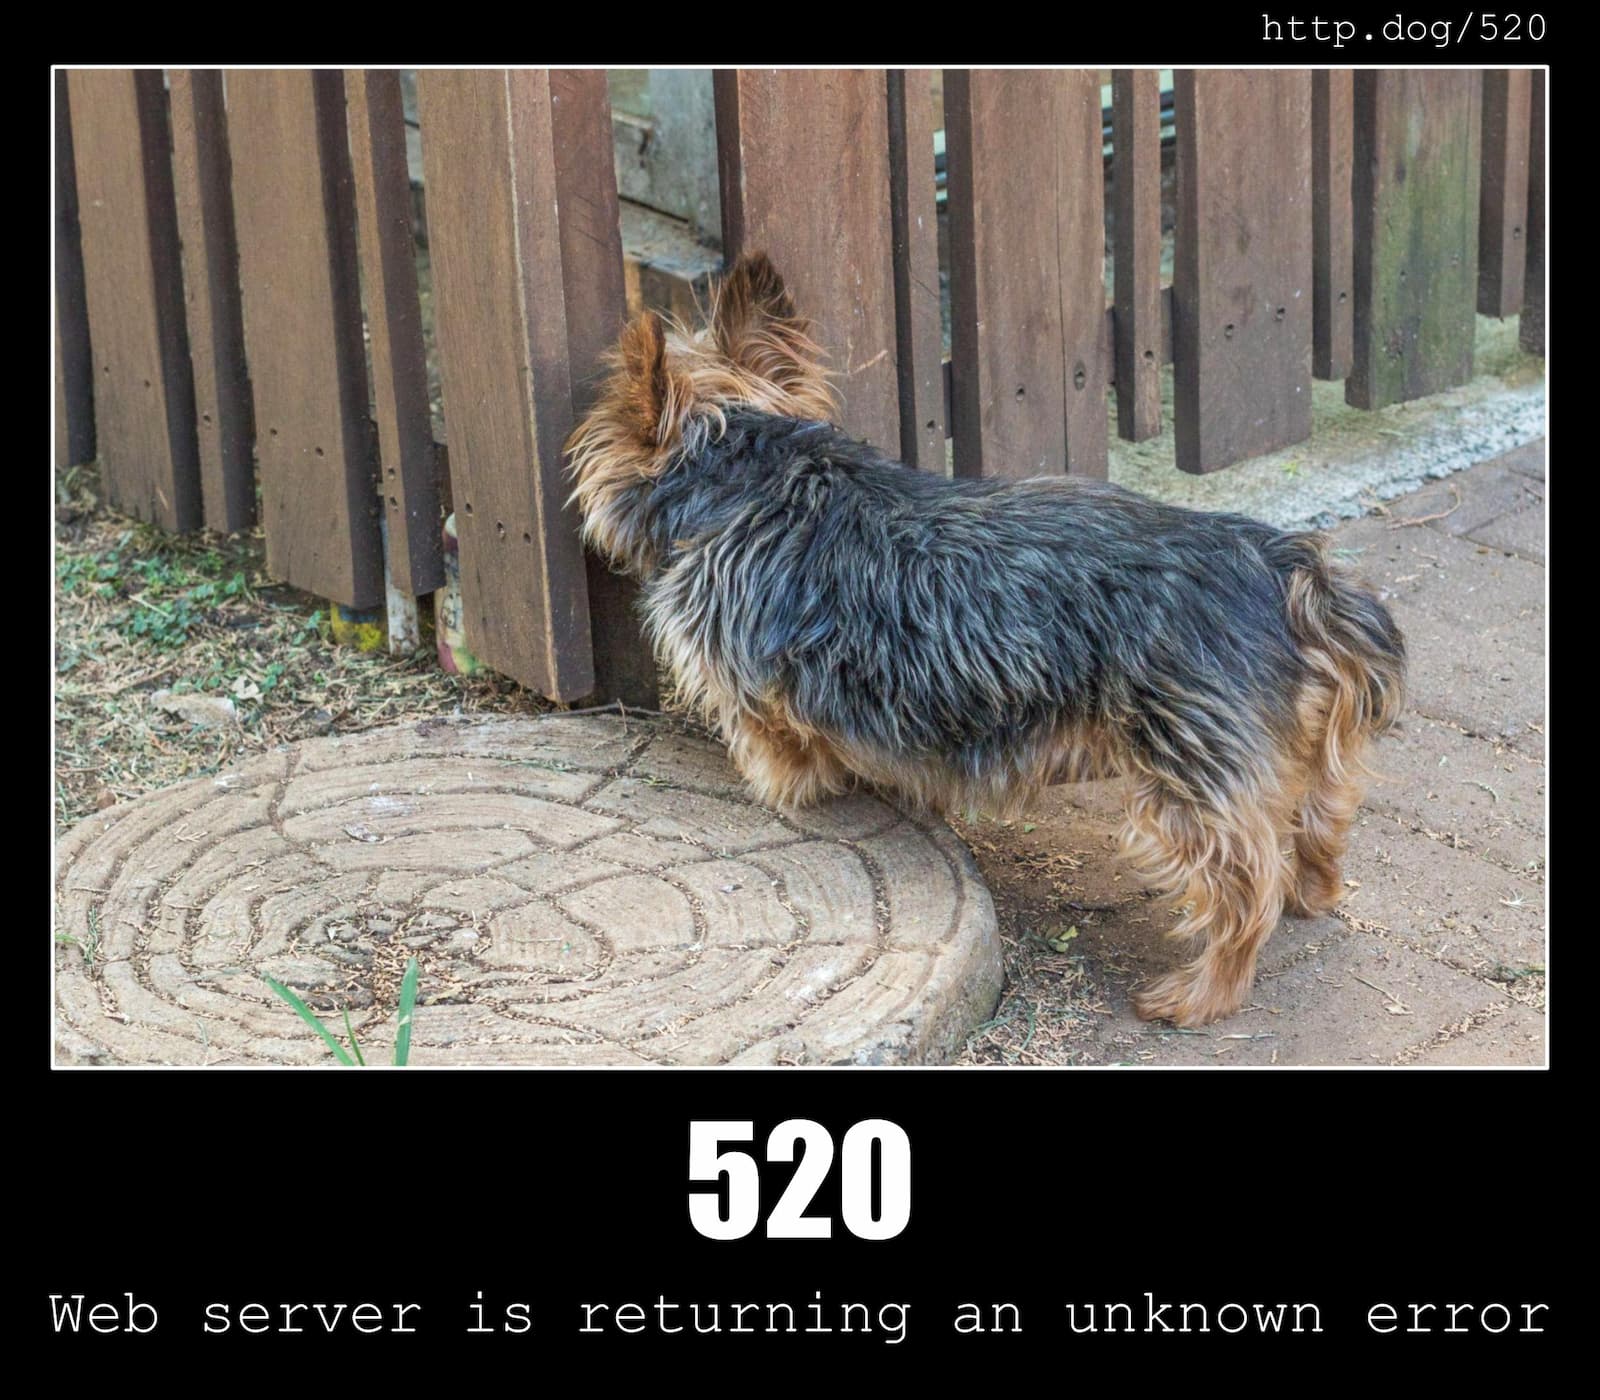 HTTP Status Code 520 Web server is returning an unknown error